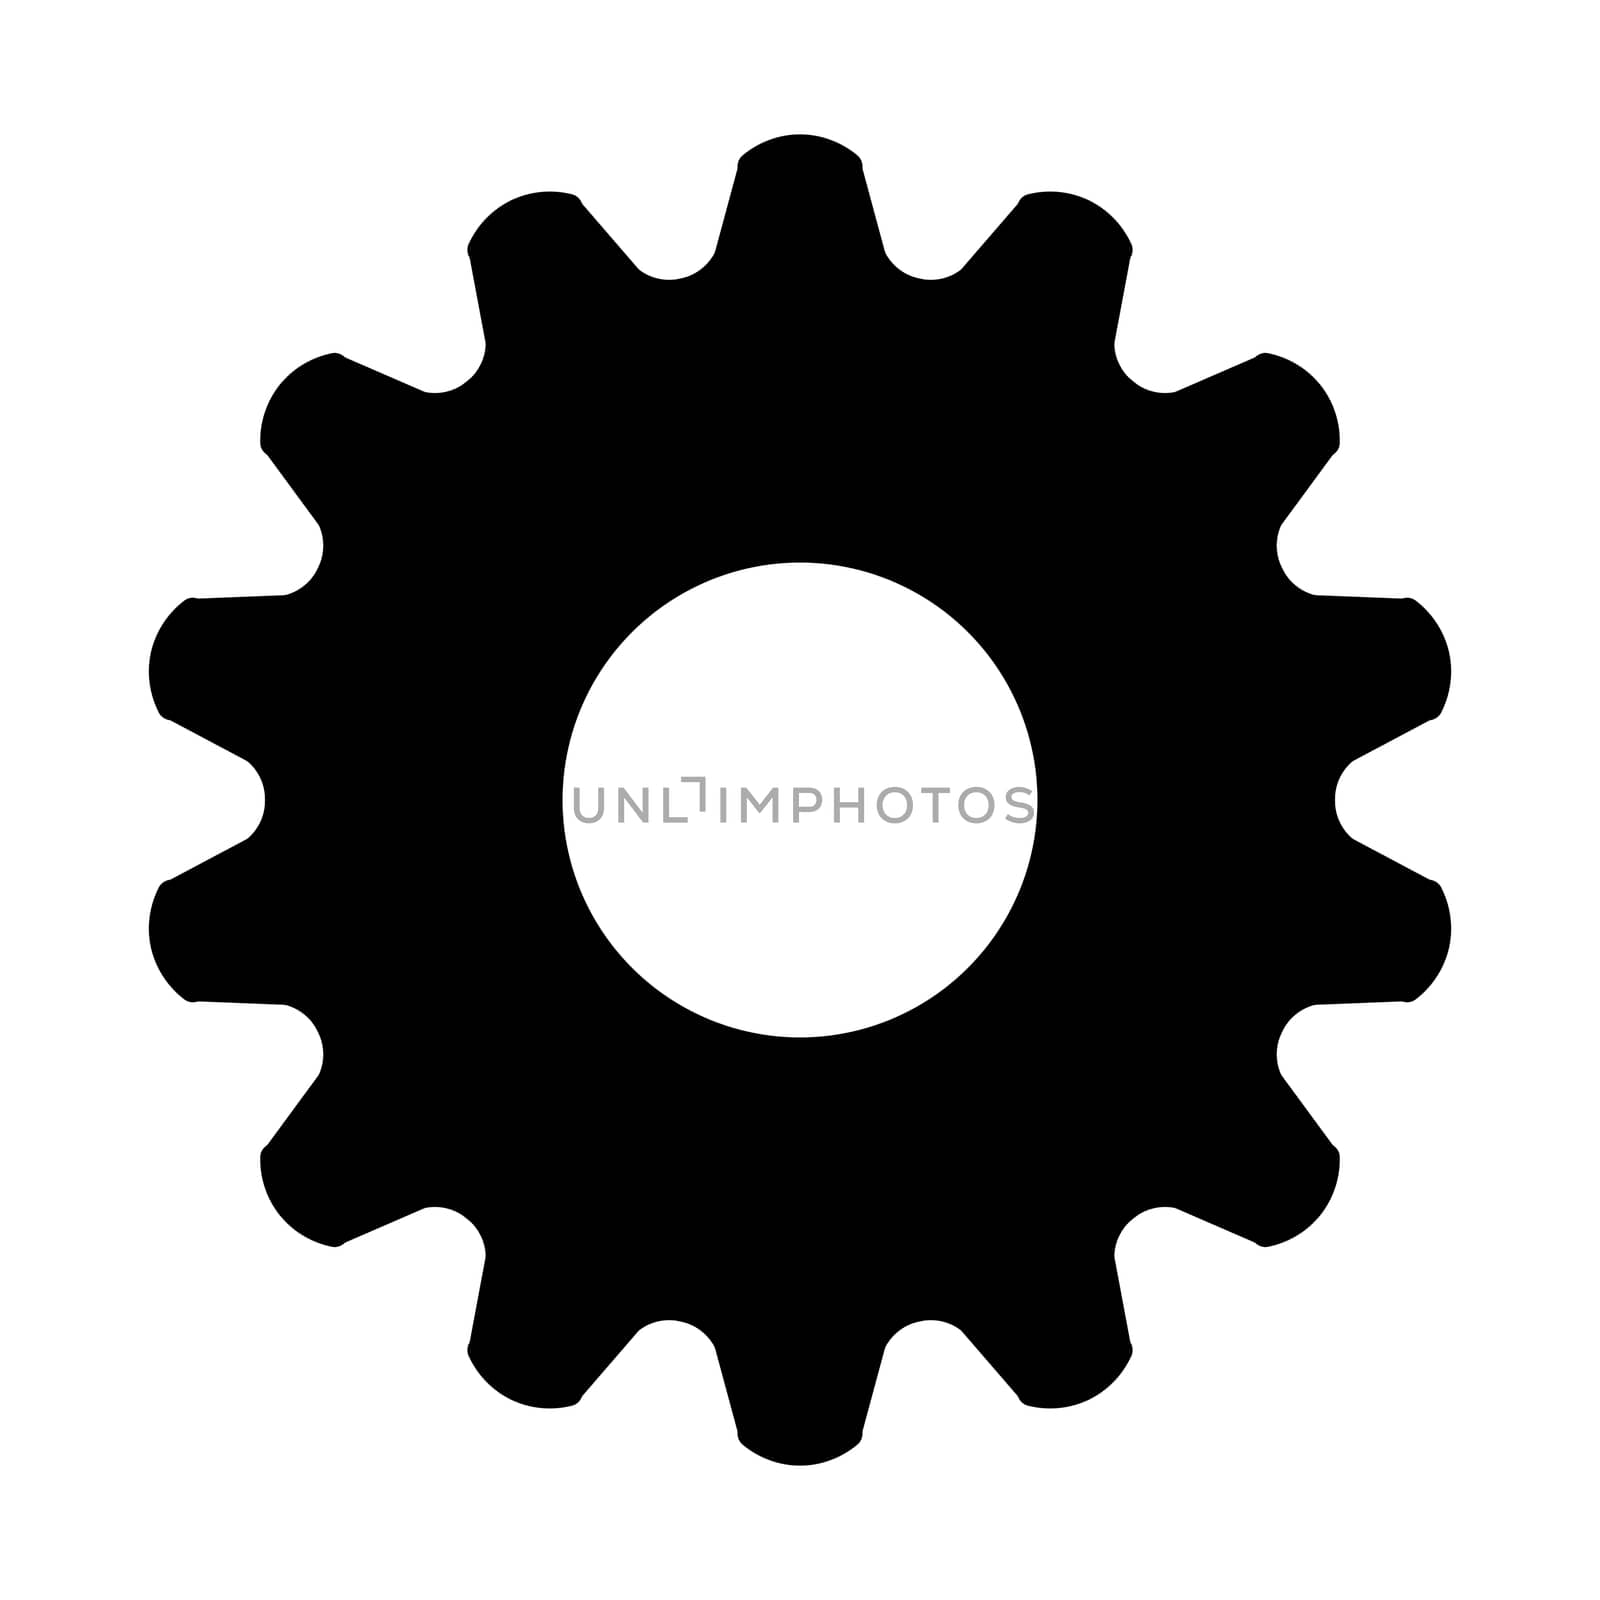 Gear or cog icon on white background.Technological driving, symbol,